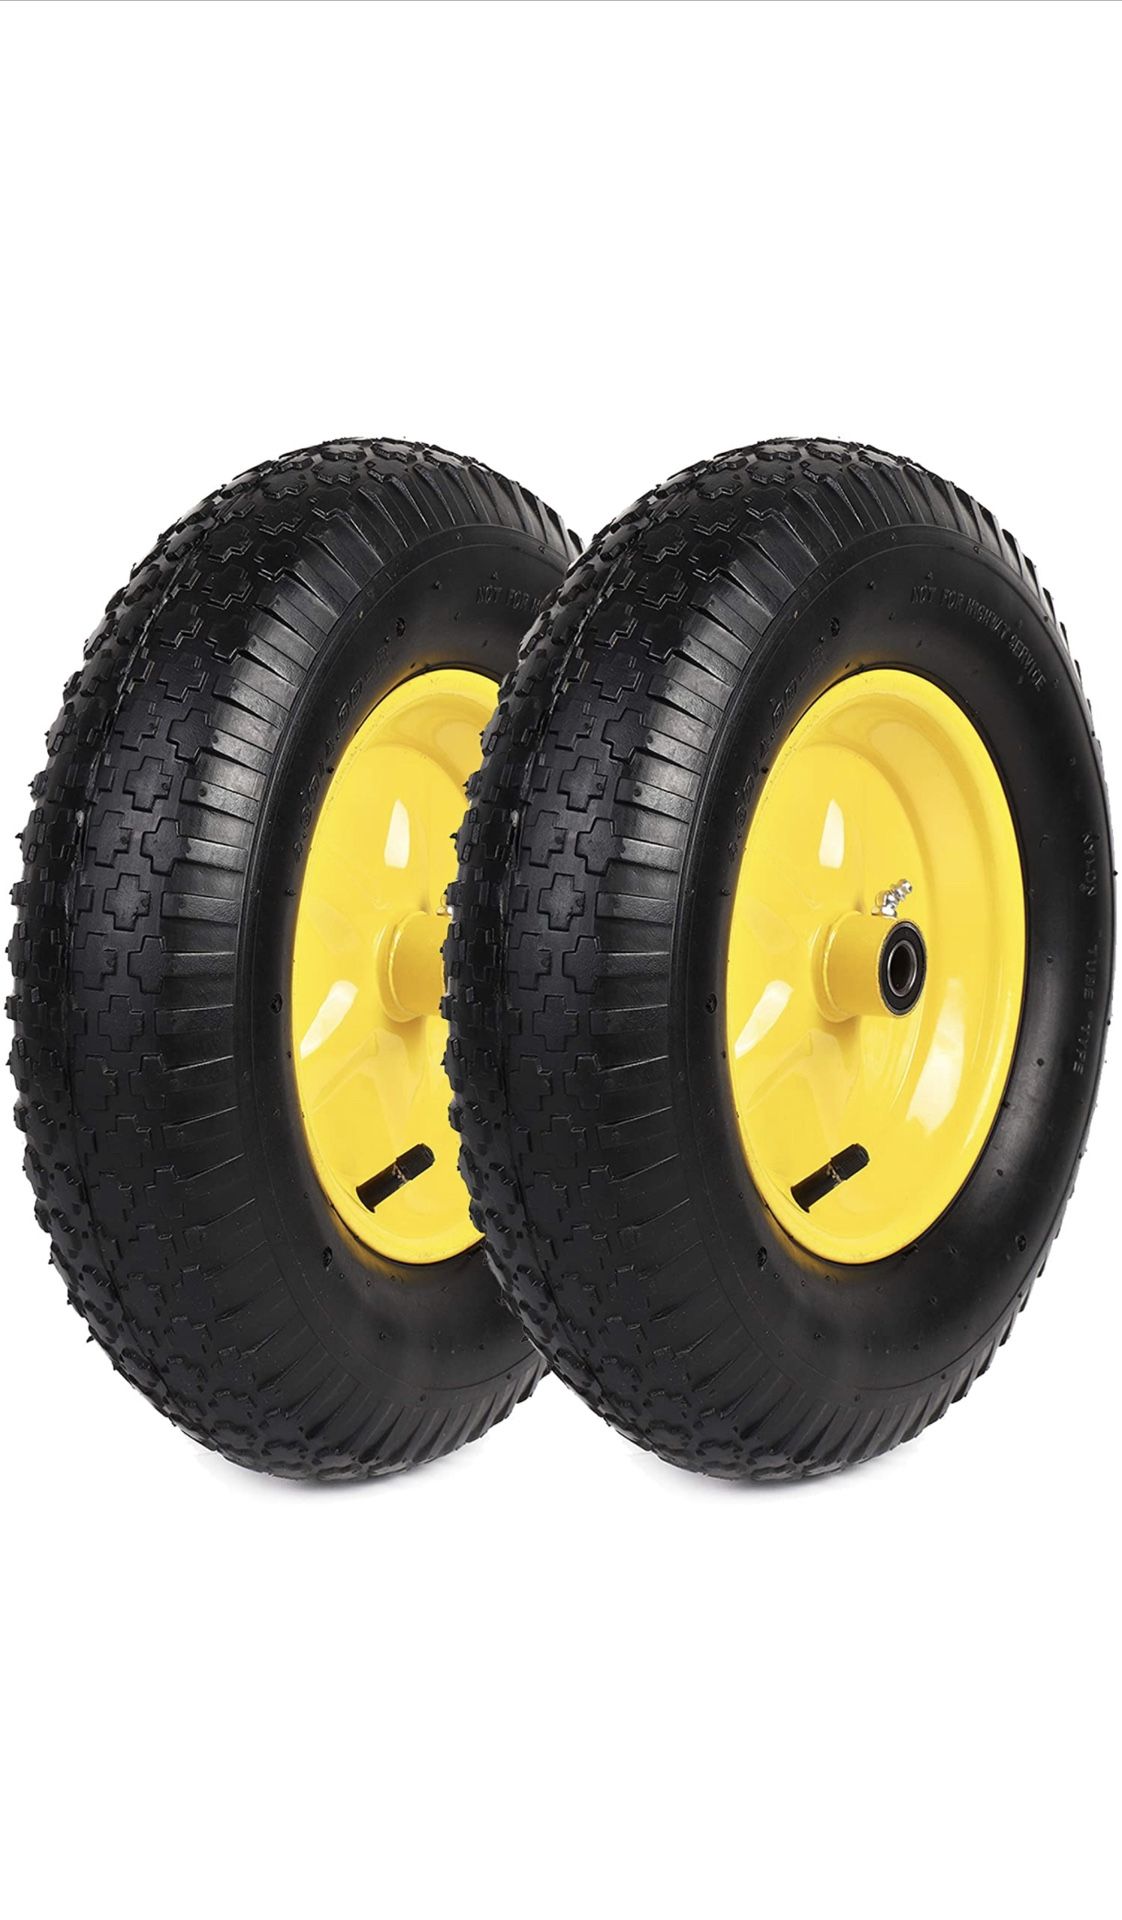 AR-PRO (2-Pack) 4.80/4.00-8" Tire and Wheel Set - Universal Replacement Utility Equipment Tubed Tire and Wheel，3" Hub, and 5/8" Ball Bearings